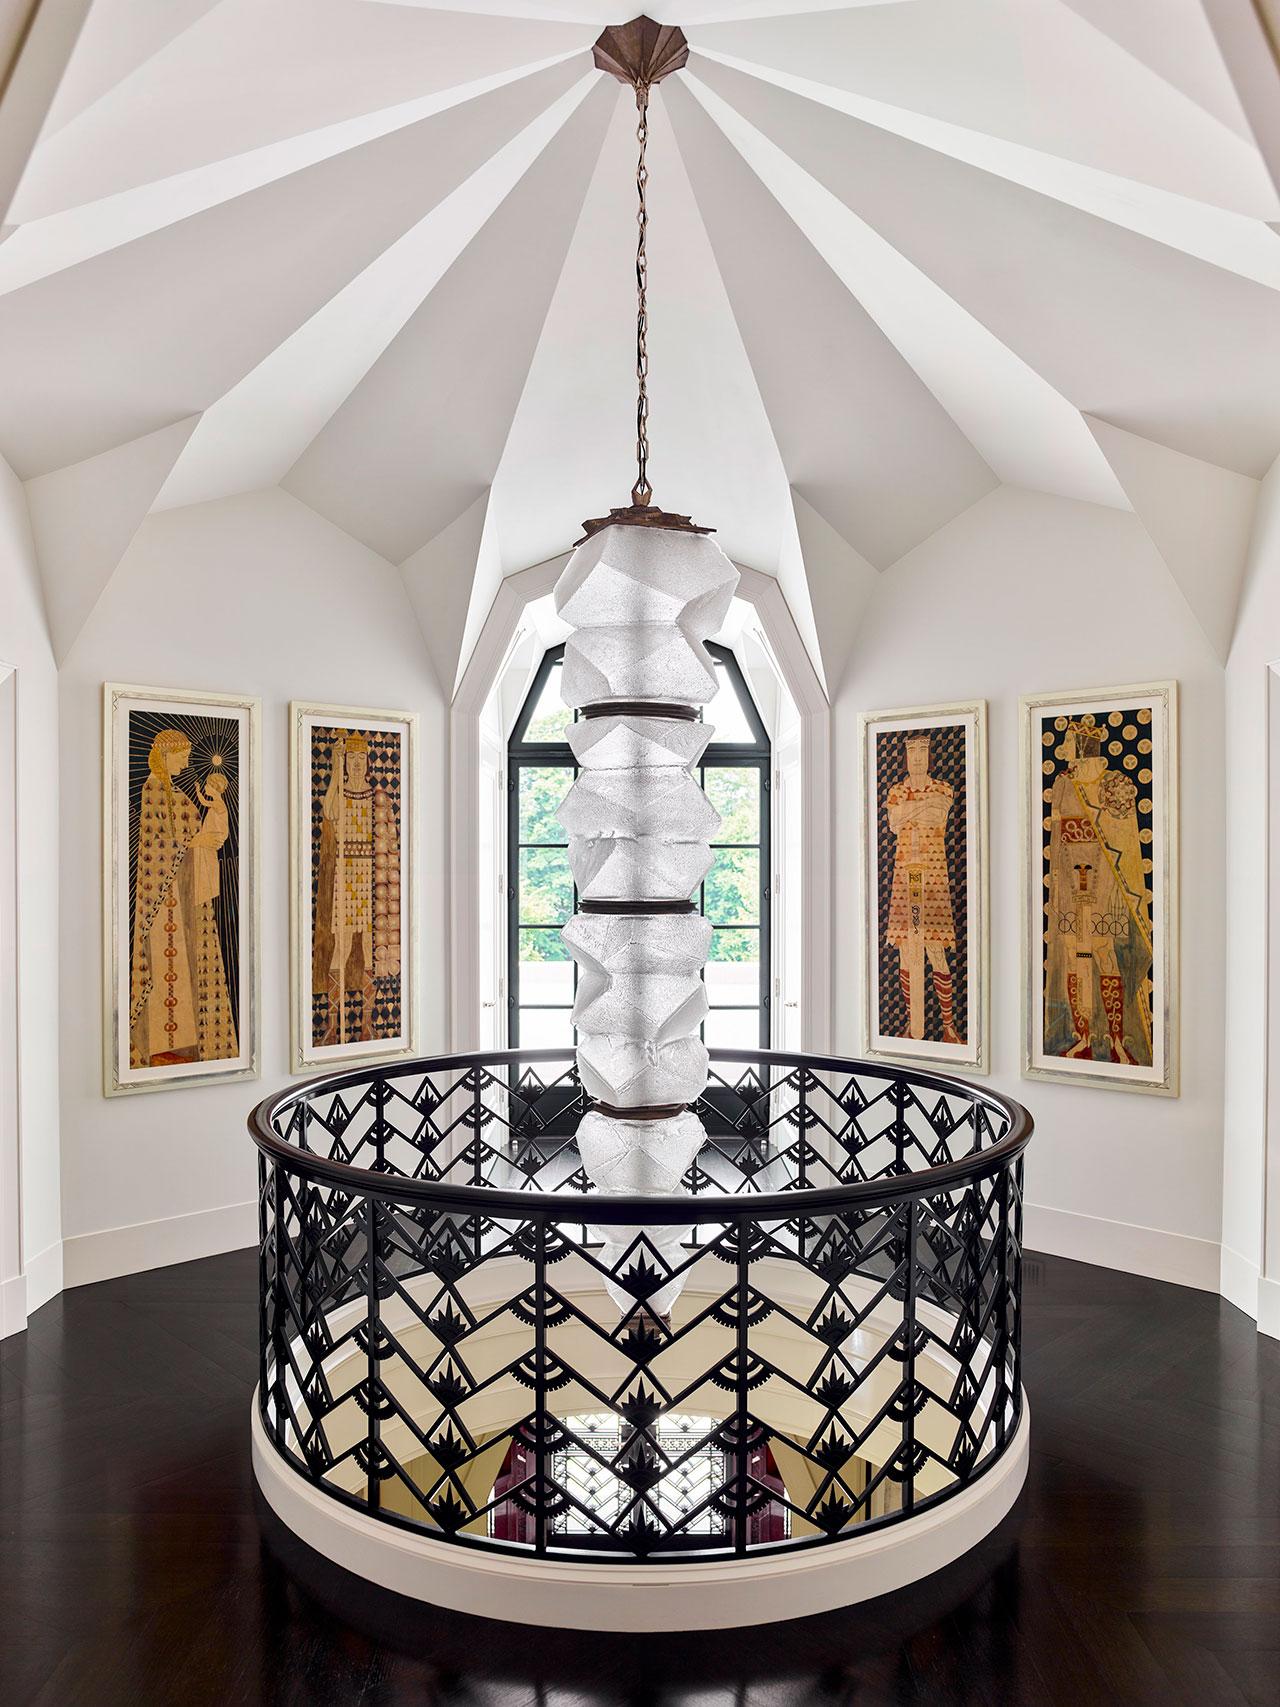 Tribune: A jagged hand-blown cut-glass and cast-bronze light fixture by Thaddeus Wolfe (2015) descends from the faceted planes of the vaulted ceiling. Hung on the angled walls are Josef Engelhart’s pencil-and-watercolor sketches for his Merlinsage frieze (1904).
Photography by Eric Piasecki.